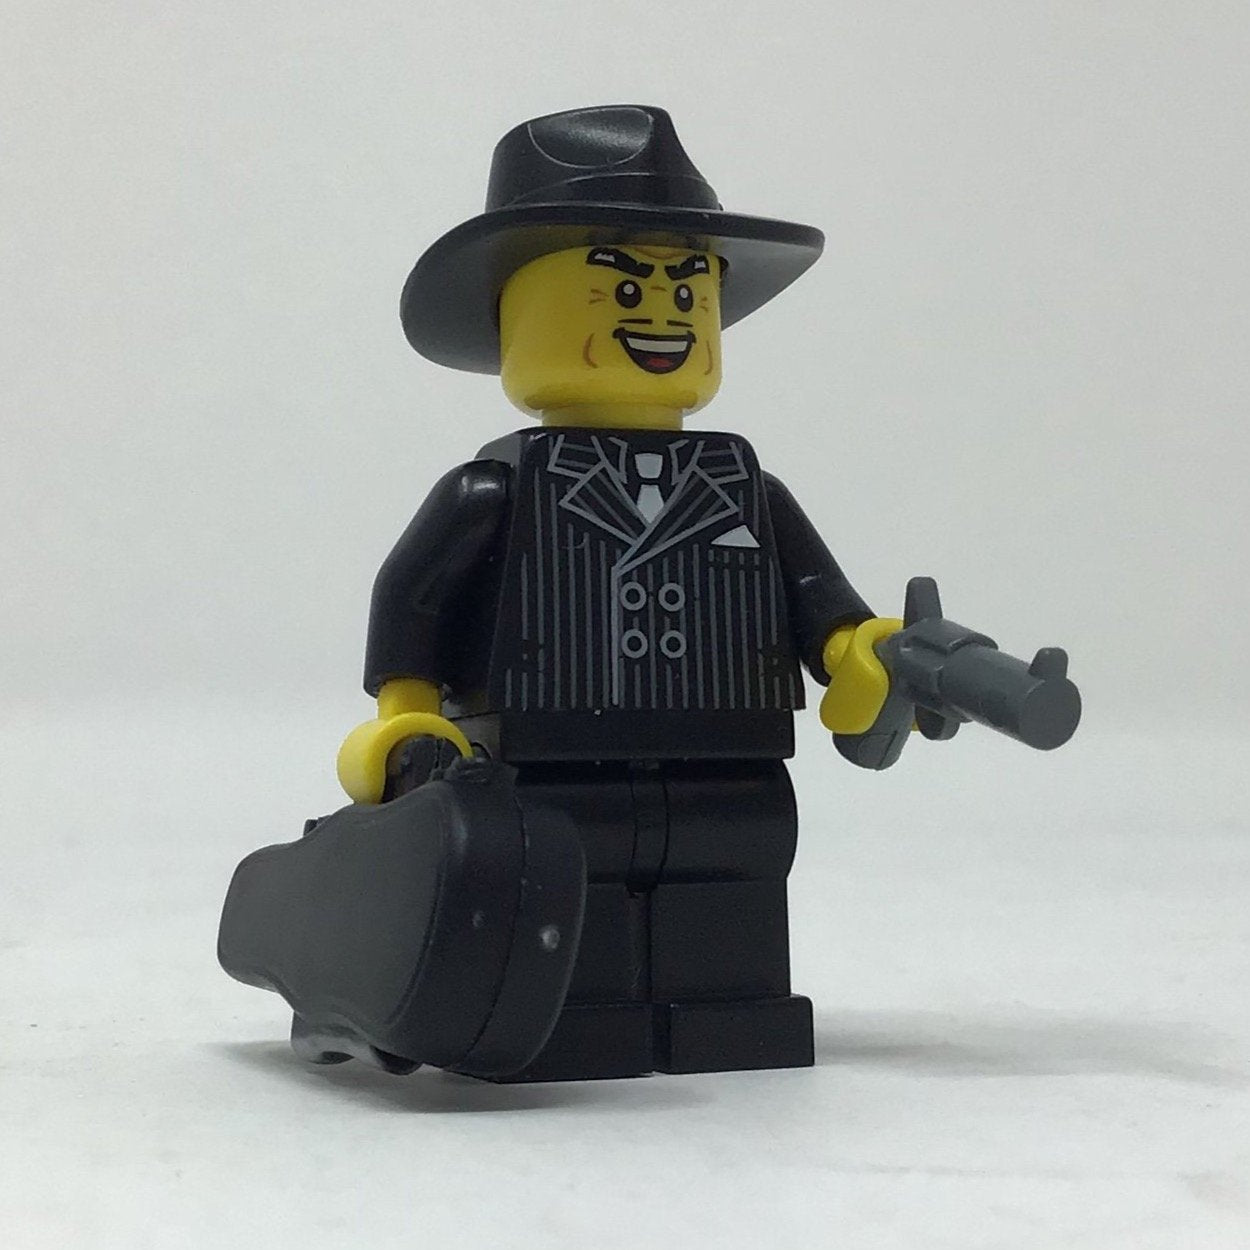 S5 Gangster - Series 5 Minifigure (col079)